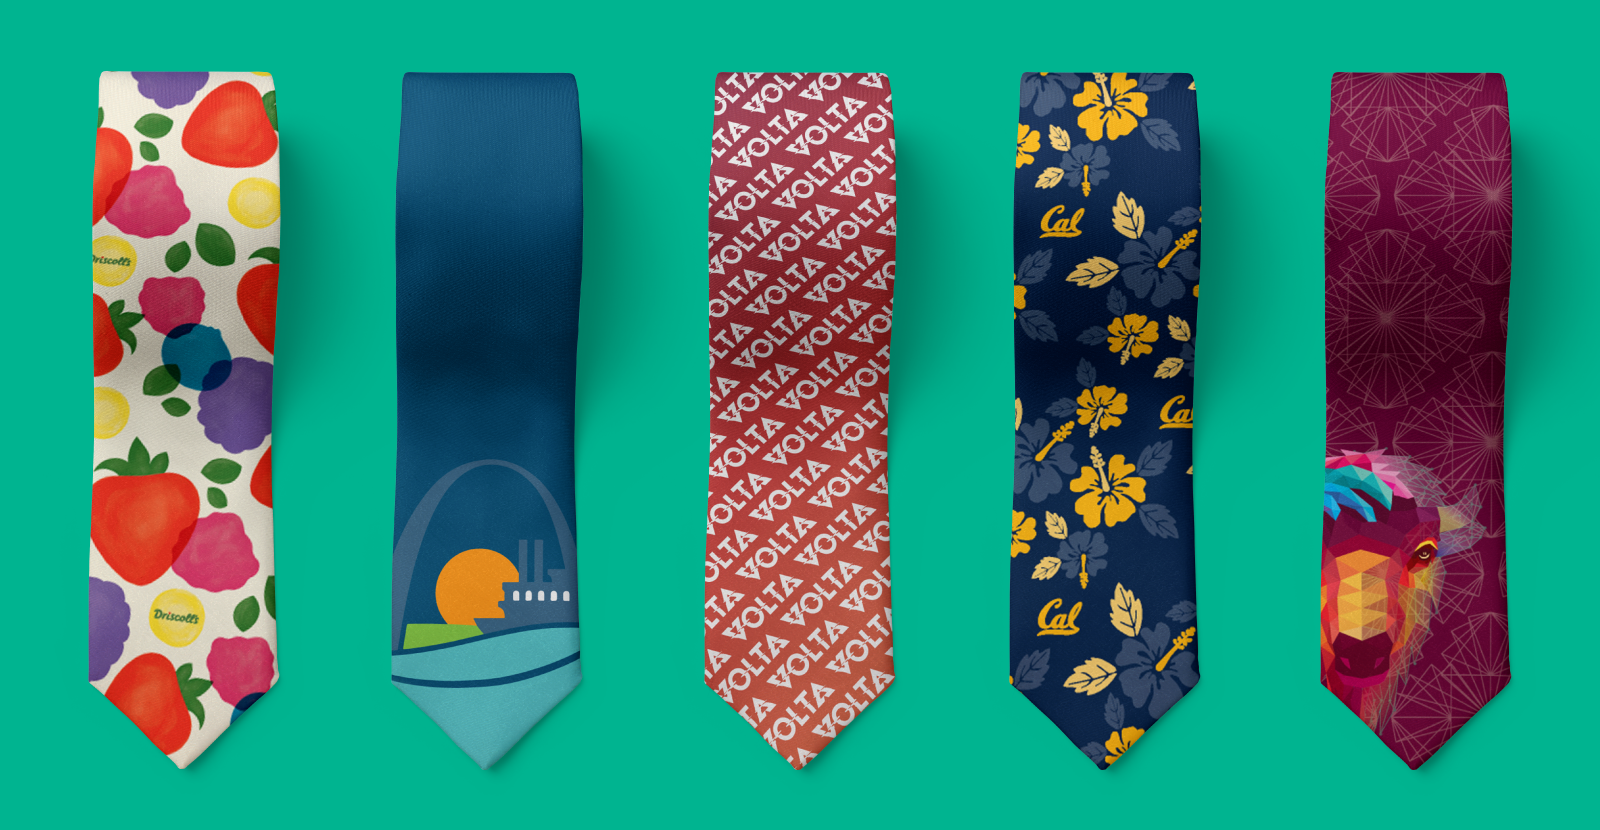 Examples of custom logo tie designs for variety of companies